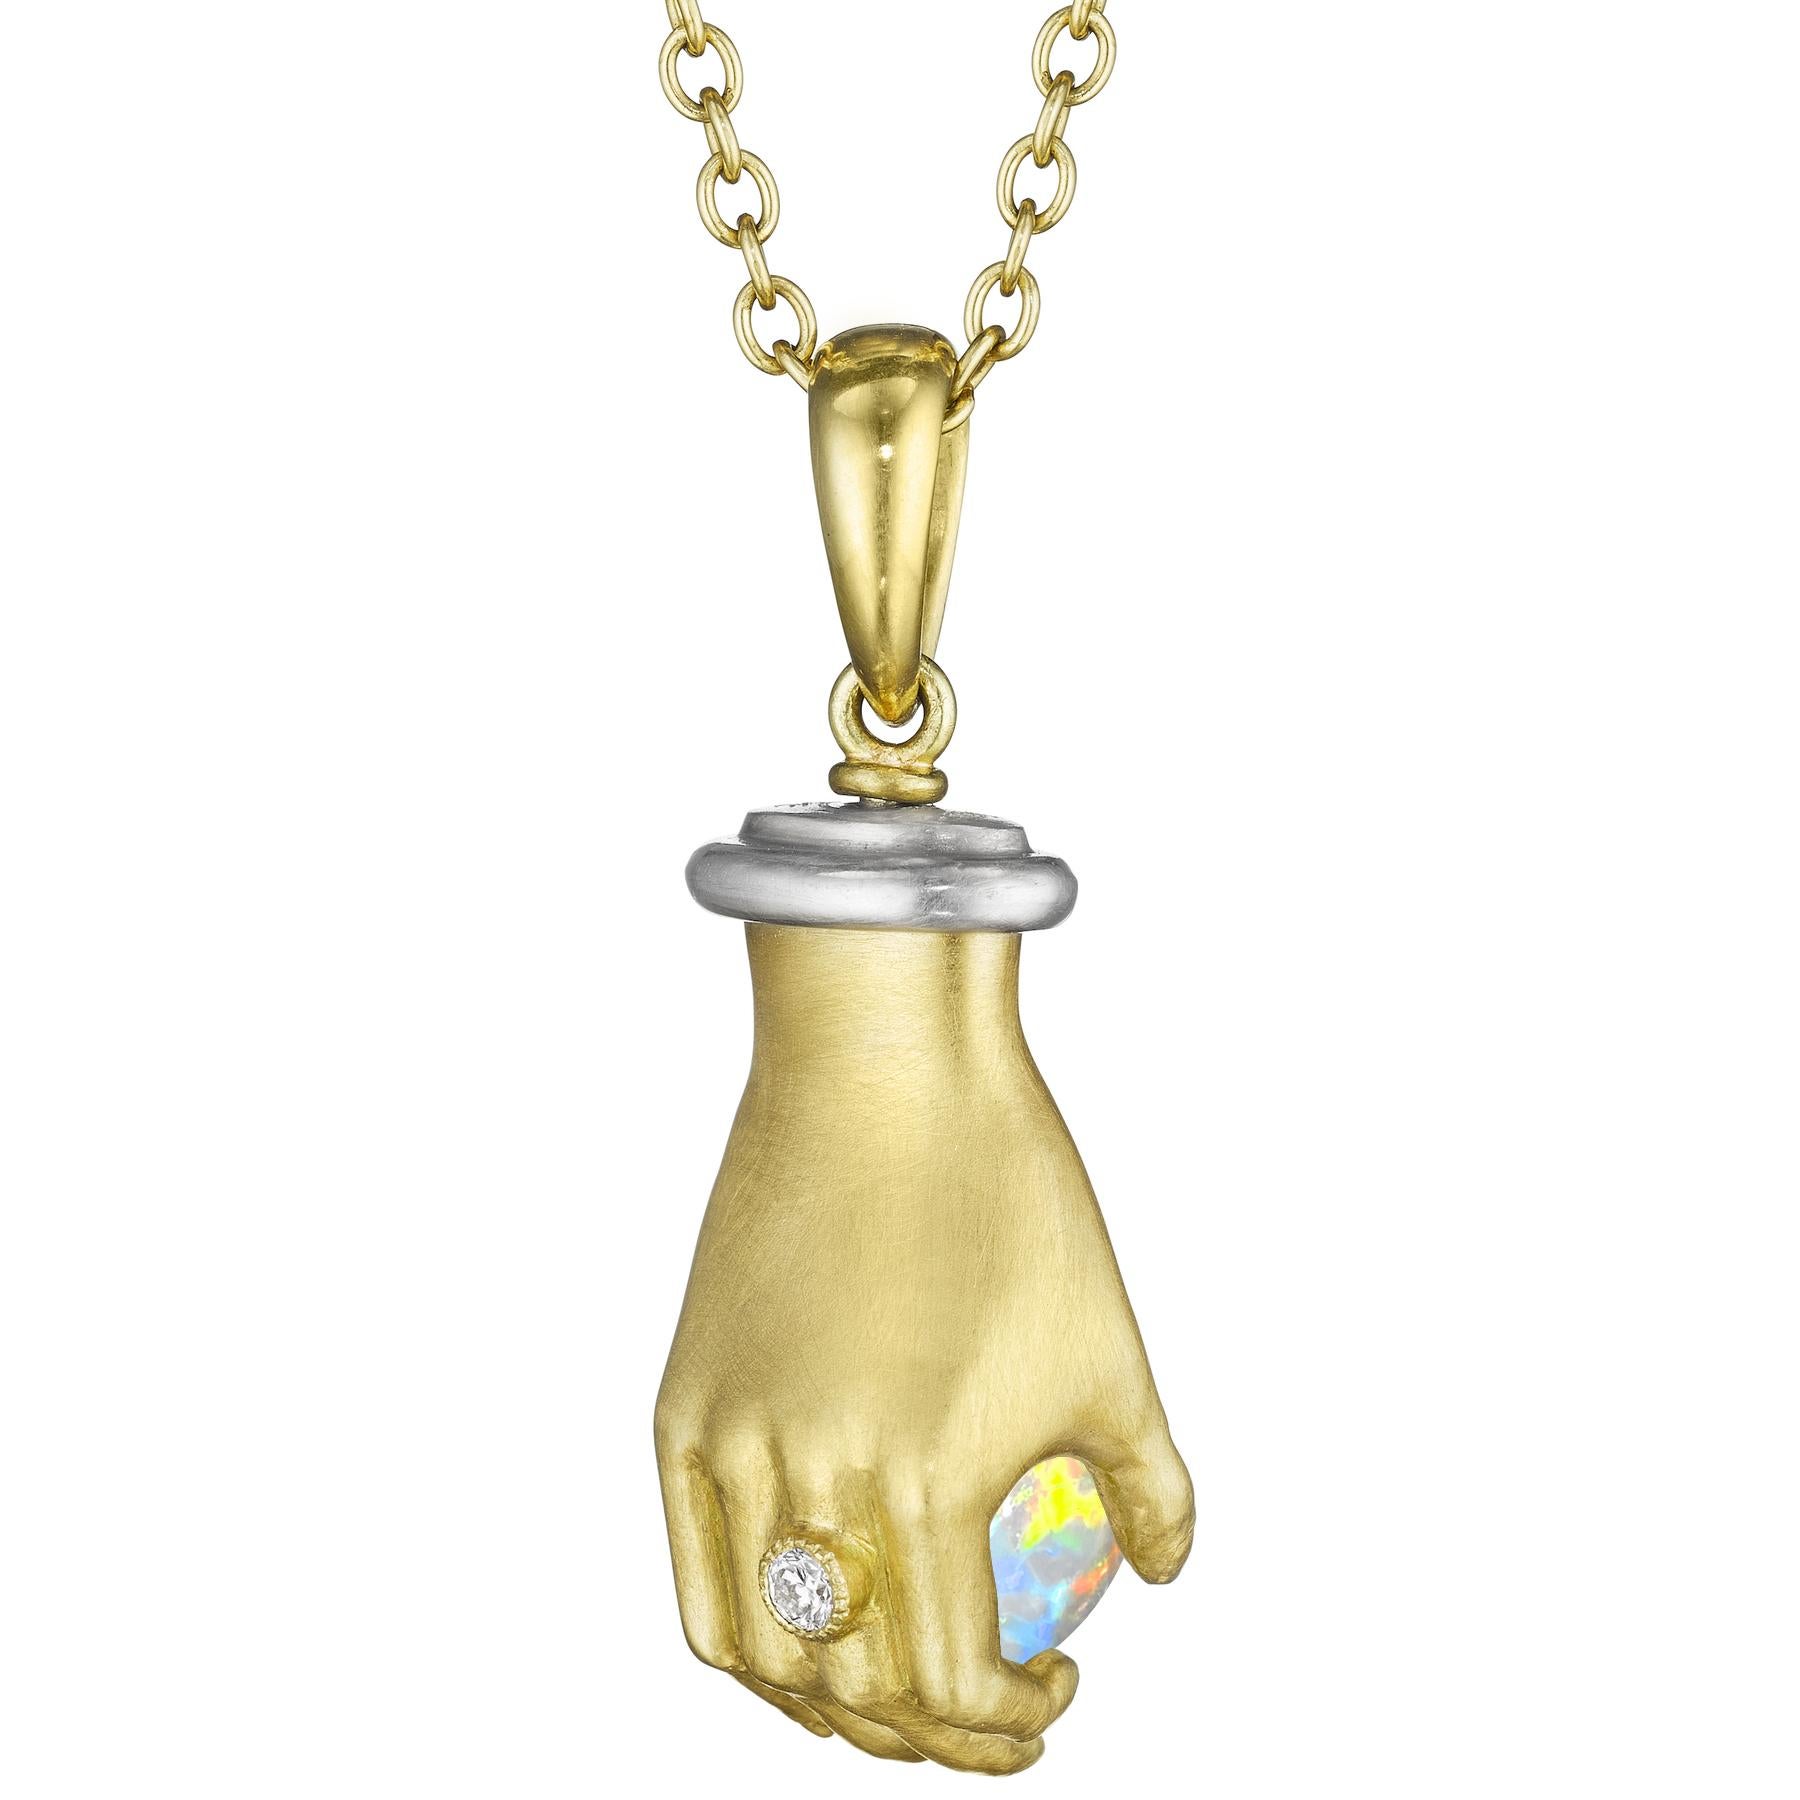 One of a Kind Adorned Hands Necklace by jewelry maker Anthony Lent, hand-fabricated in matte and high-polished 18k yellow gold featuring a hand-cut Ethiopian opal 11mm sphere with a full spectrum of extraordinary color flash, gripped by an